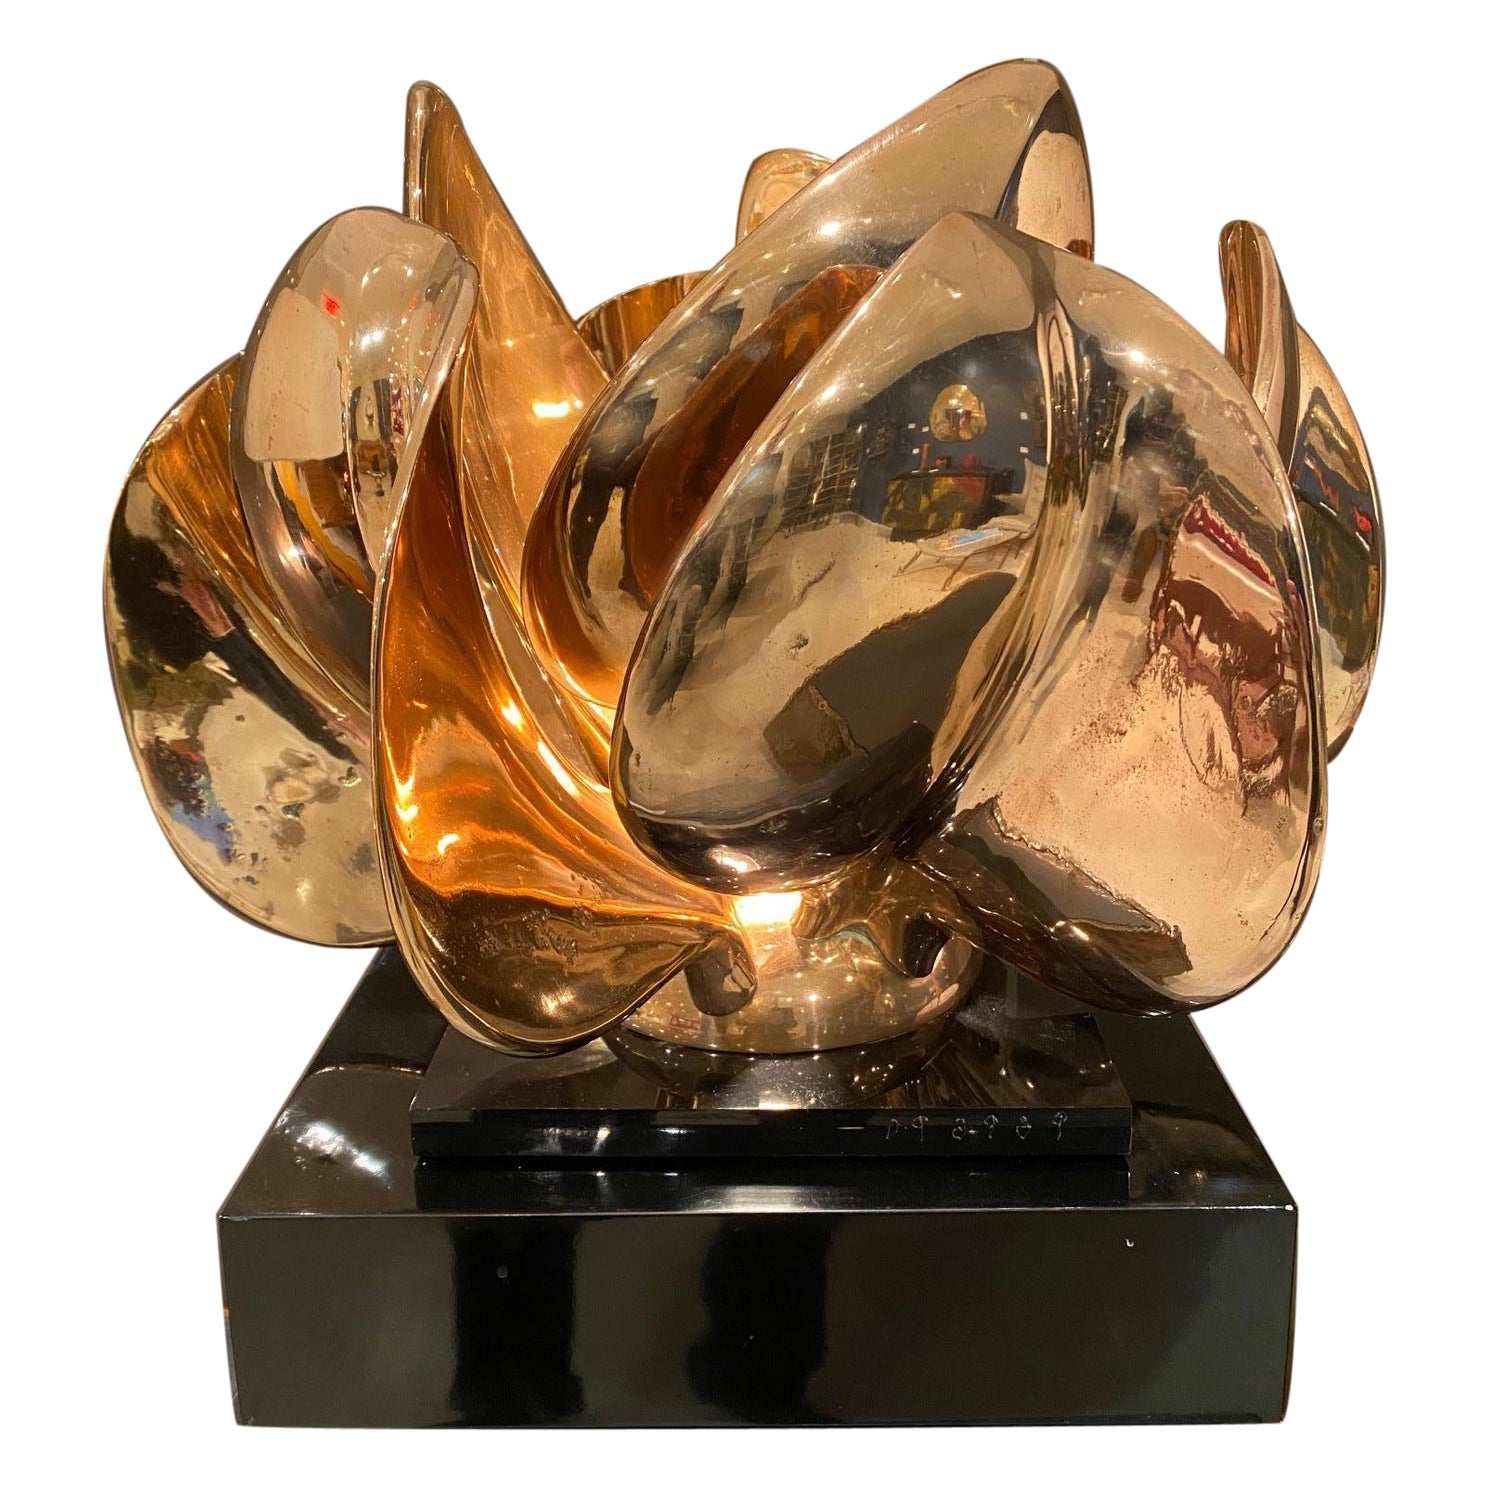 Solid Bronze Illuminated Sculpture "Fleur D'or" by Atelier Michel Armand For Sale